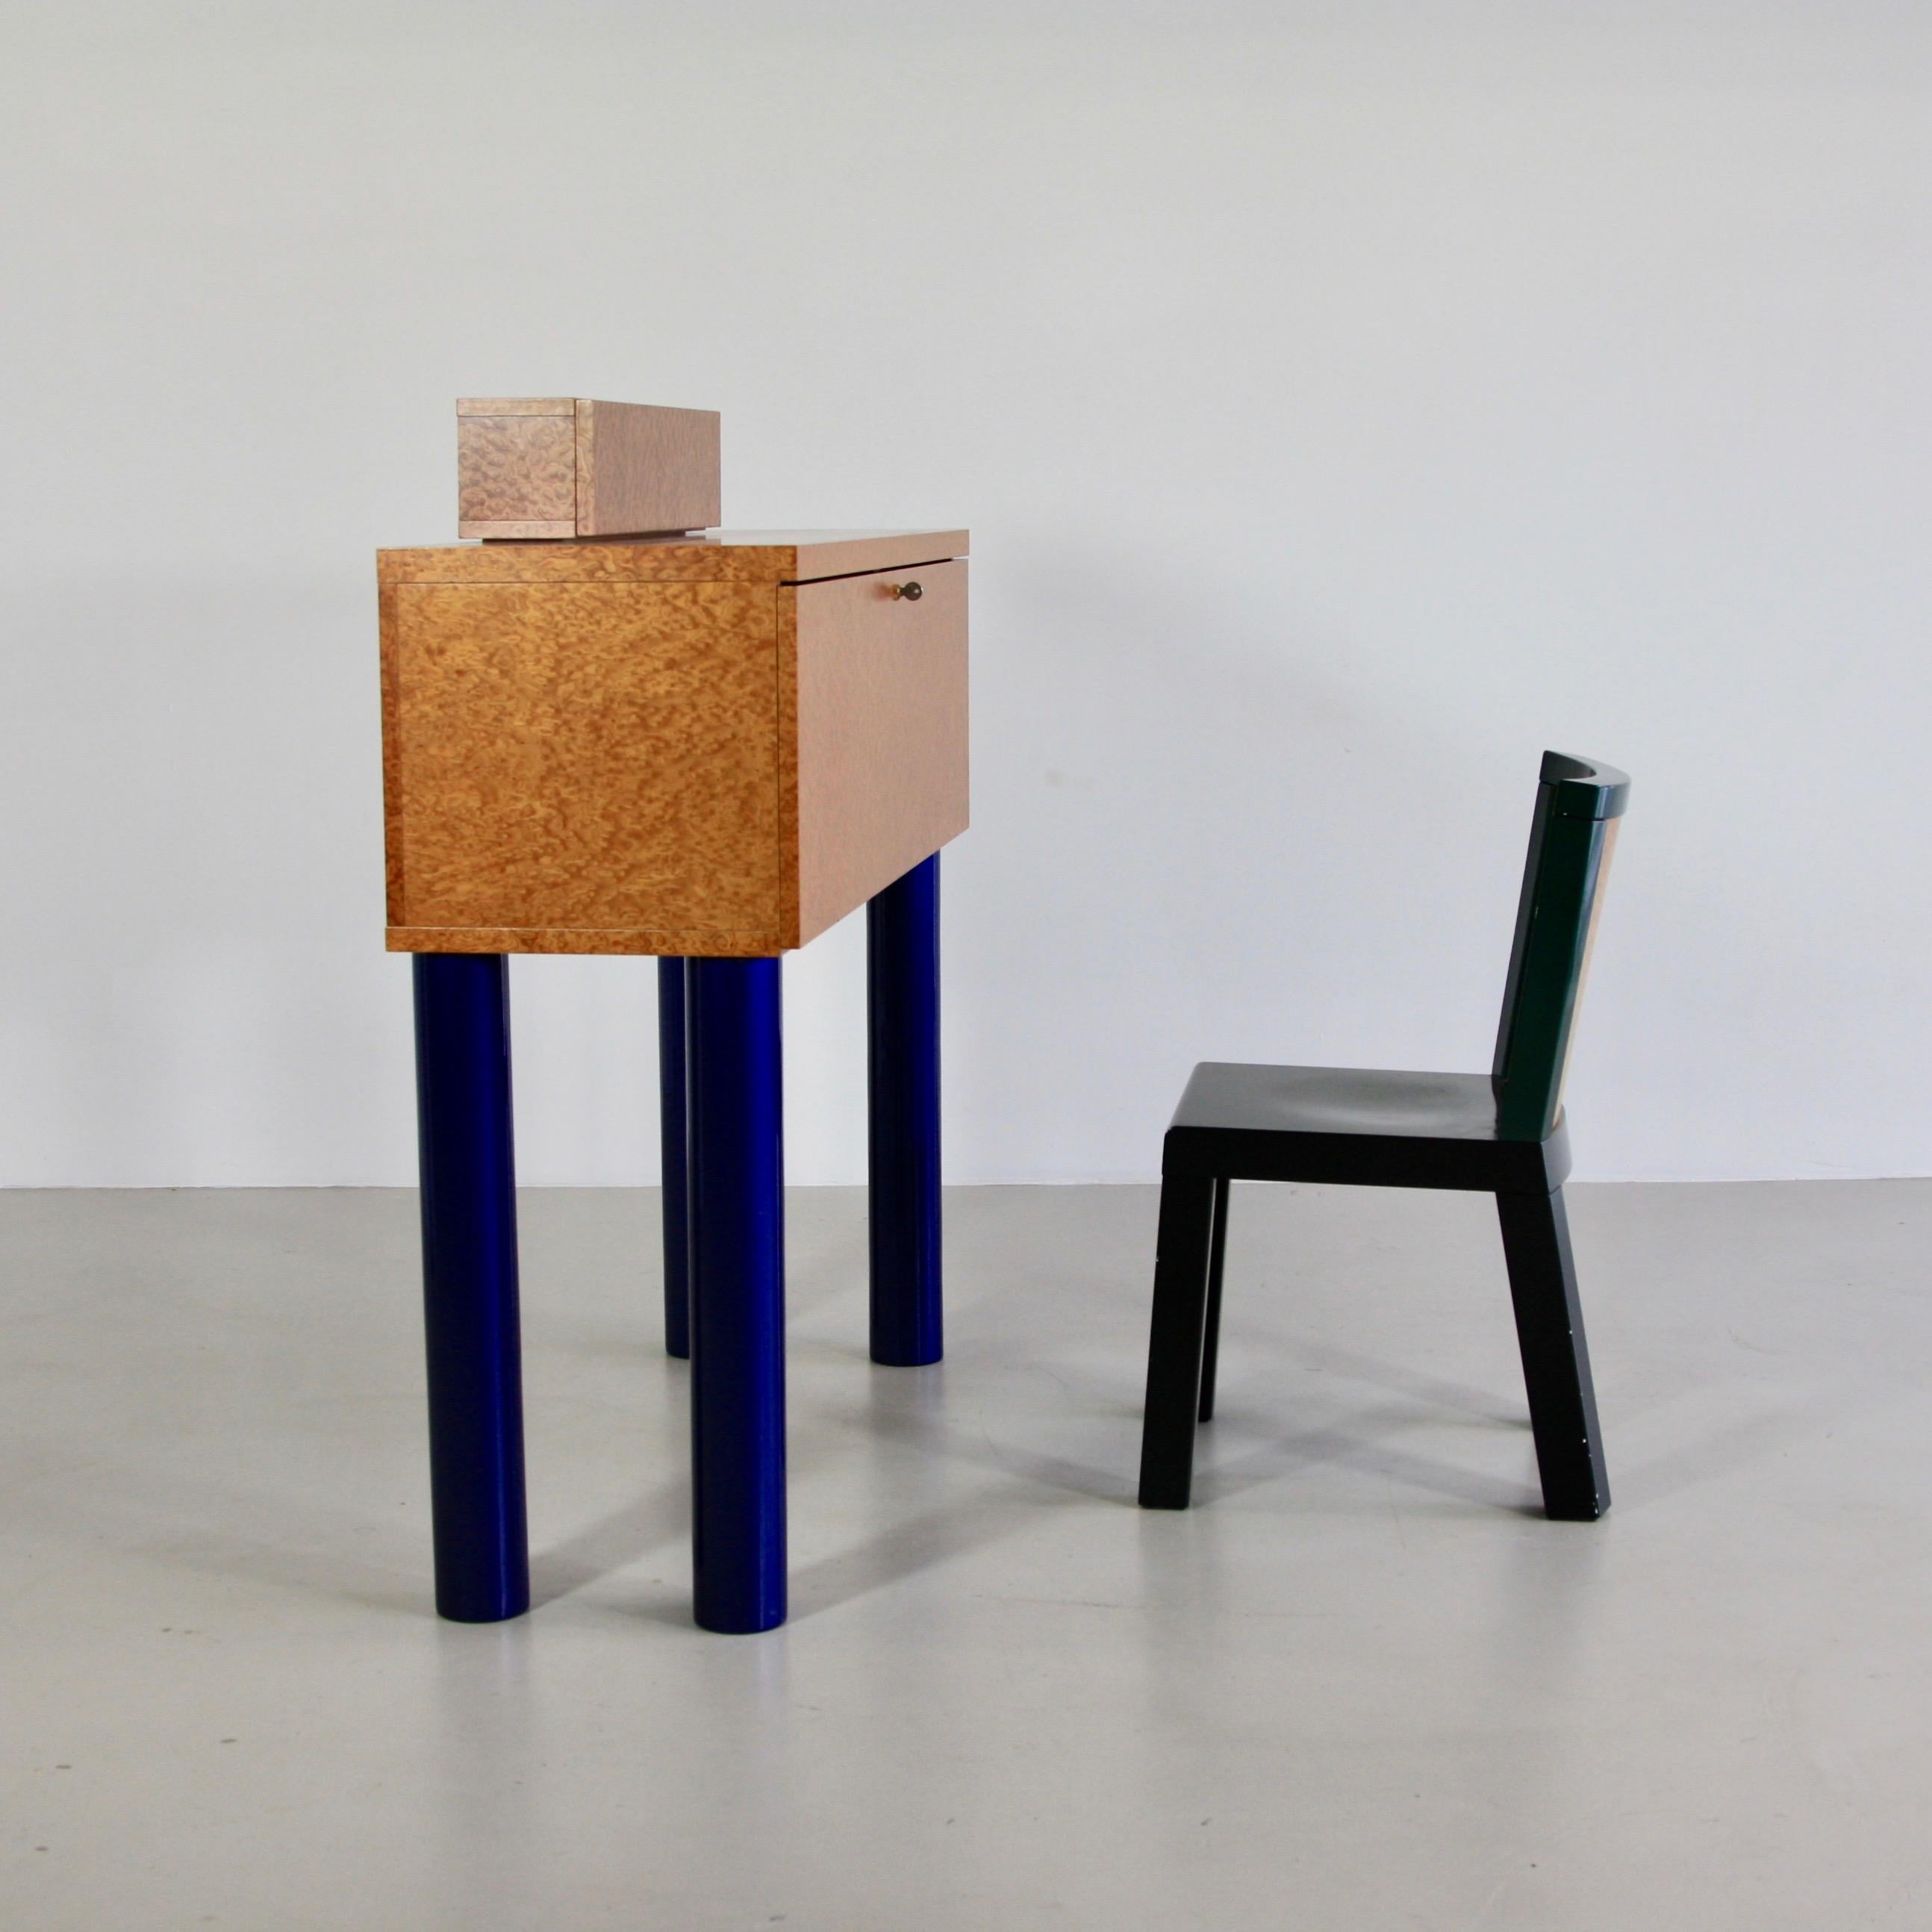 The writing desk and the matching desk chair, designed by Ettore Sottsass and Marco Zanini in 1986. The collection was labelled 'DONAU', produced by Franz Leitner in very small numbers. Produced in Milano, Franz Leitner, 1986. Rare.

Literature: